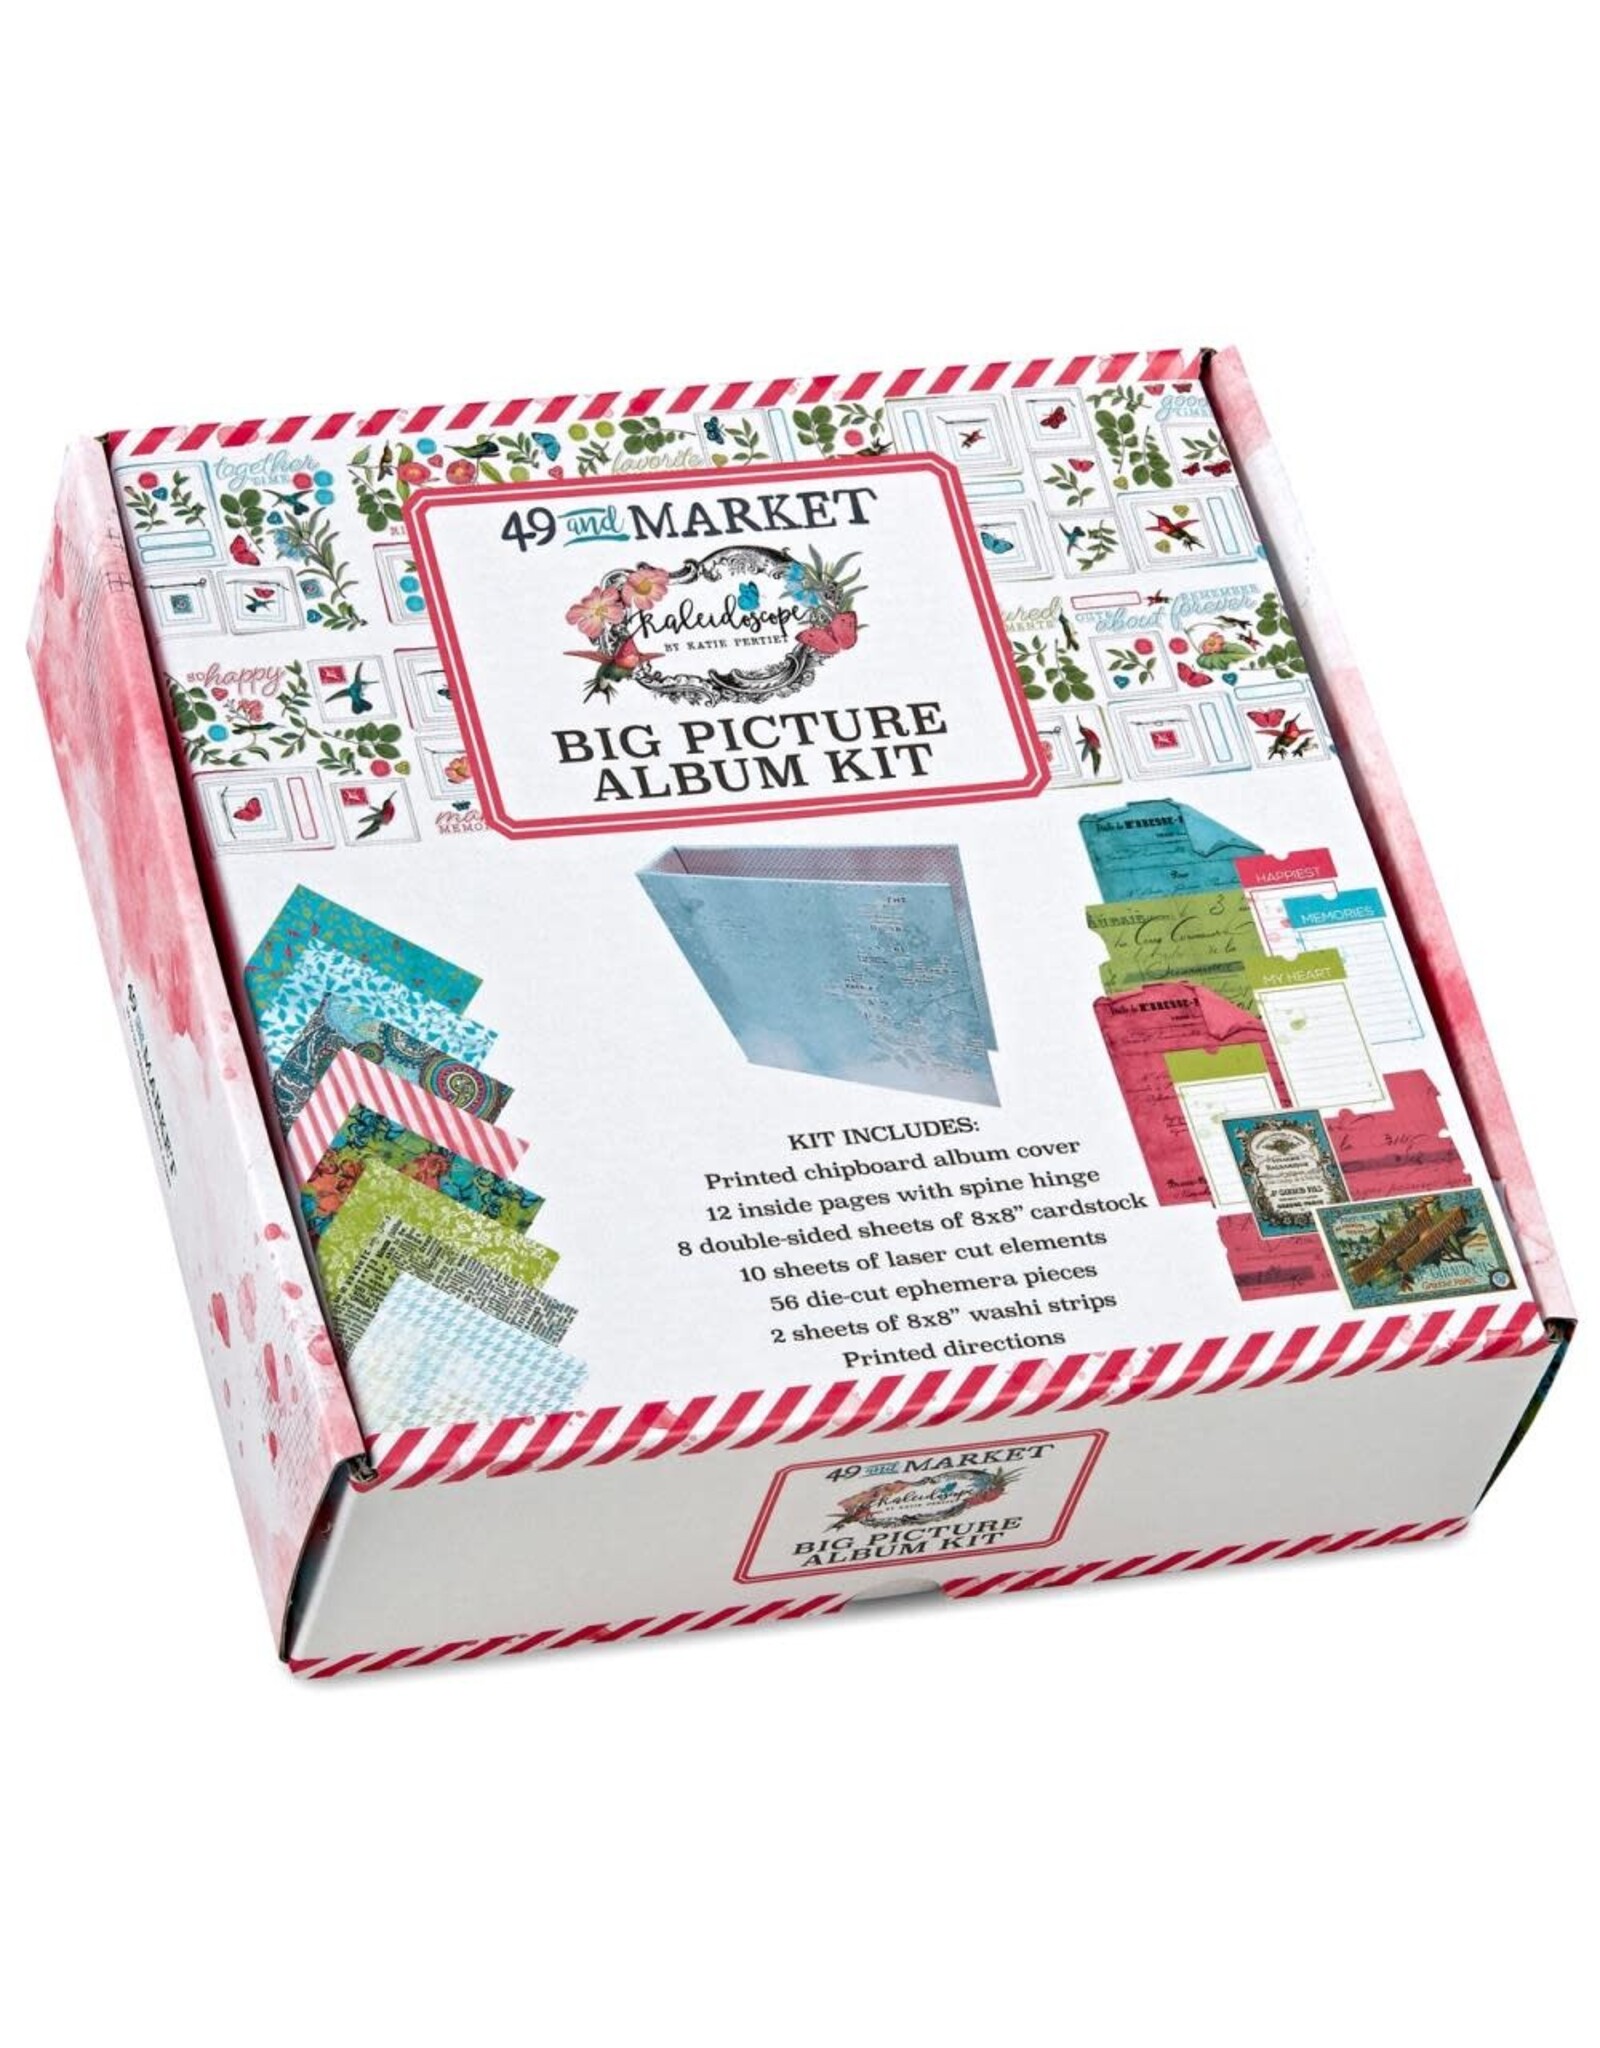 49 AND MARKET 49 AND MARKET KALEIDOSCOPE BIG PICTURE ALBUM KIT